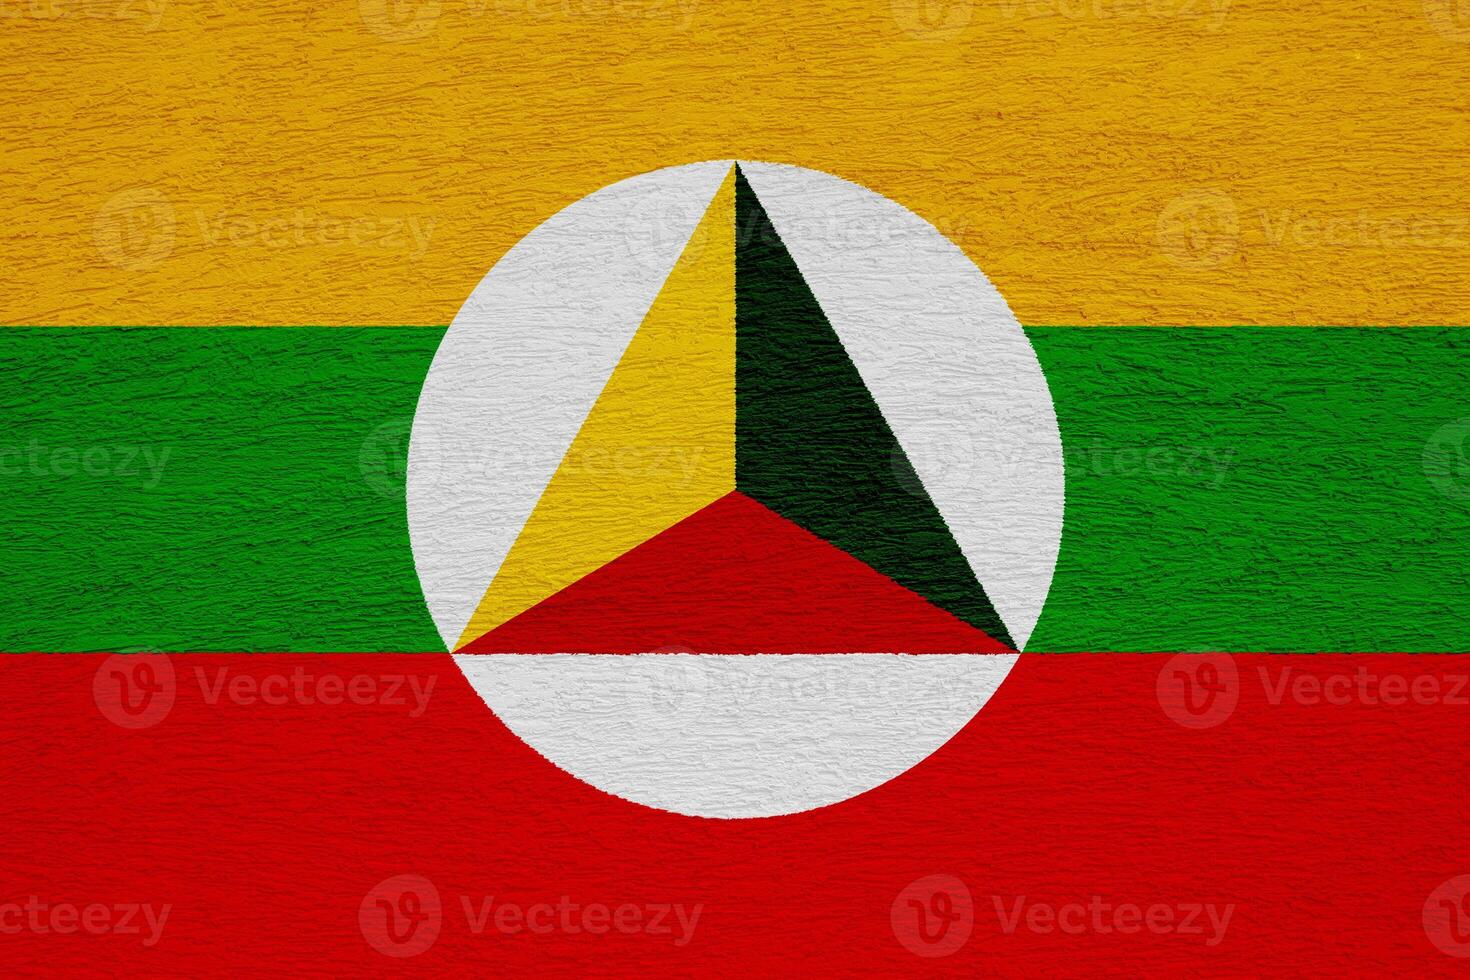 Flag and coat of arms of Shan State on a textured background. Concept collage. photo